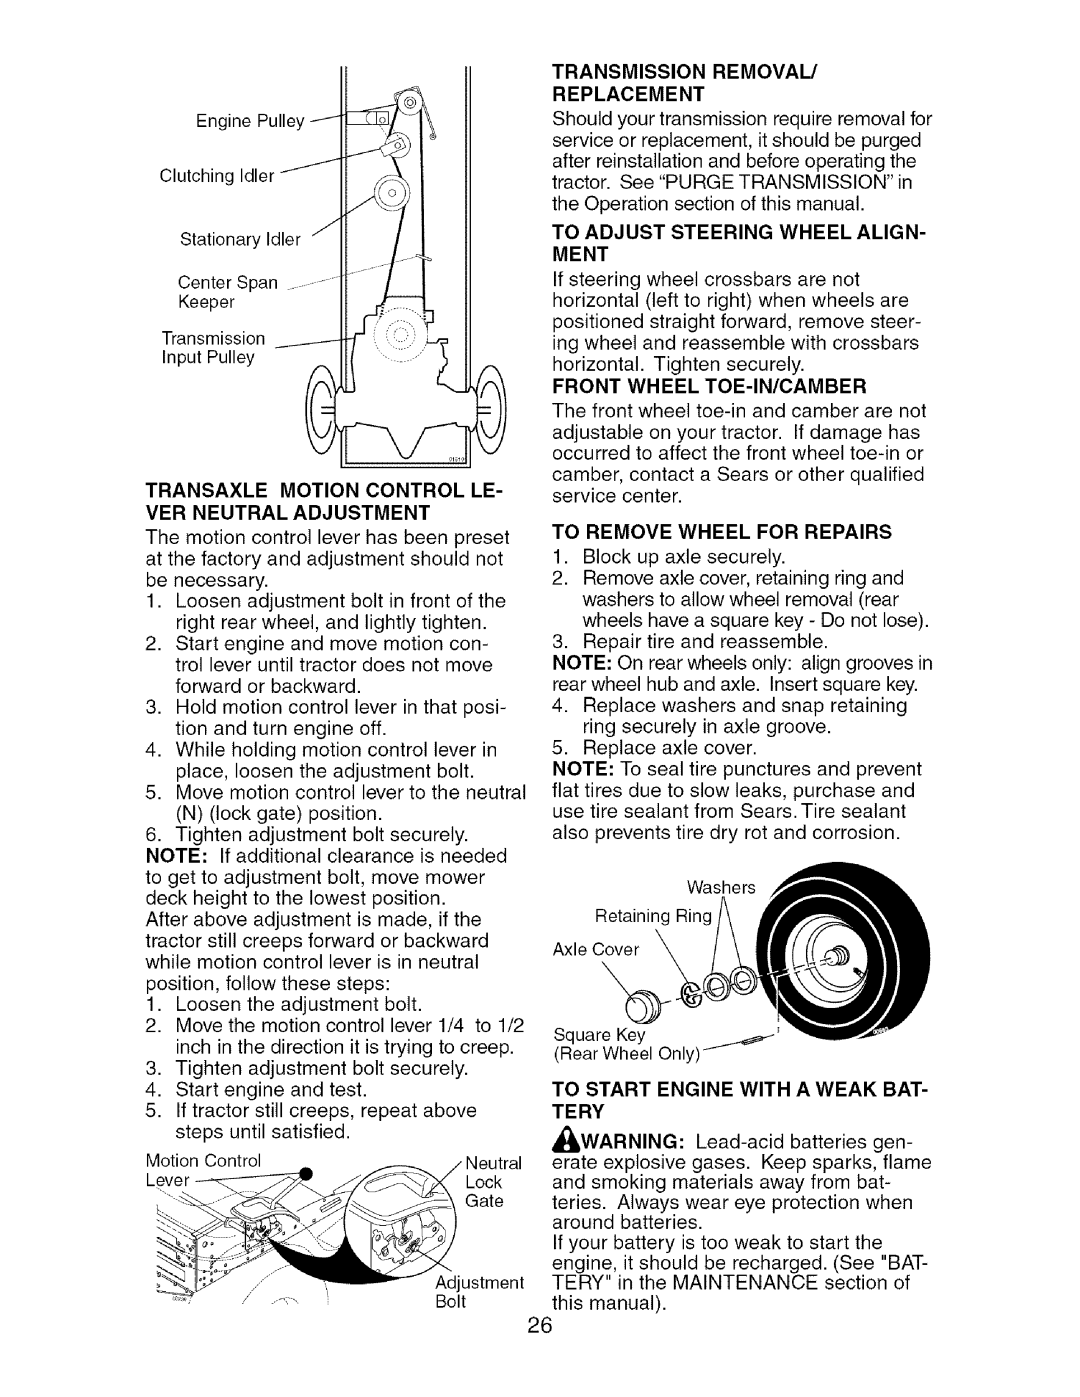 Craftsman 917.275764 Transaxle Motion Control Le, Ver Neutral Adjustment, Transmission Removal Replacement, Ment 